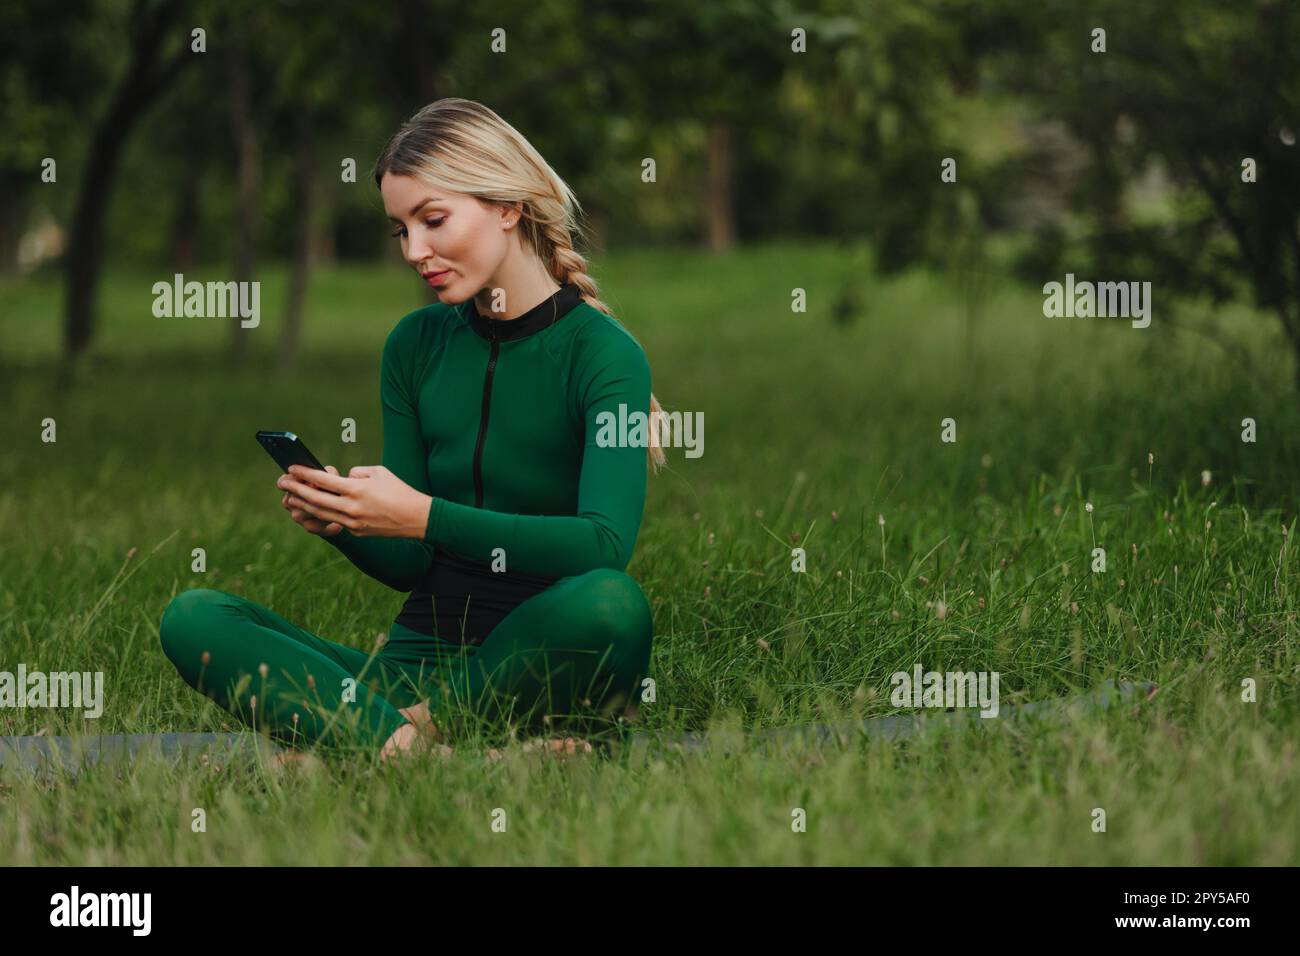 Yoga in the park with sunlight. A young woman in a lotus position sits on green grass holding a phone in her hand. The concept of digital transformation. Stock Photo